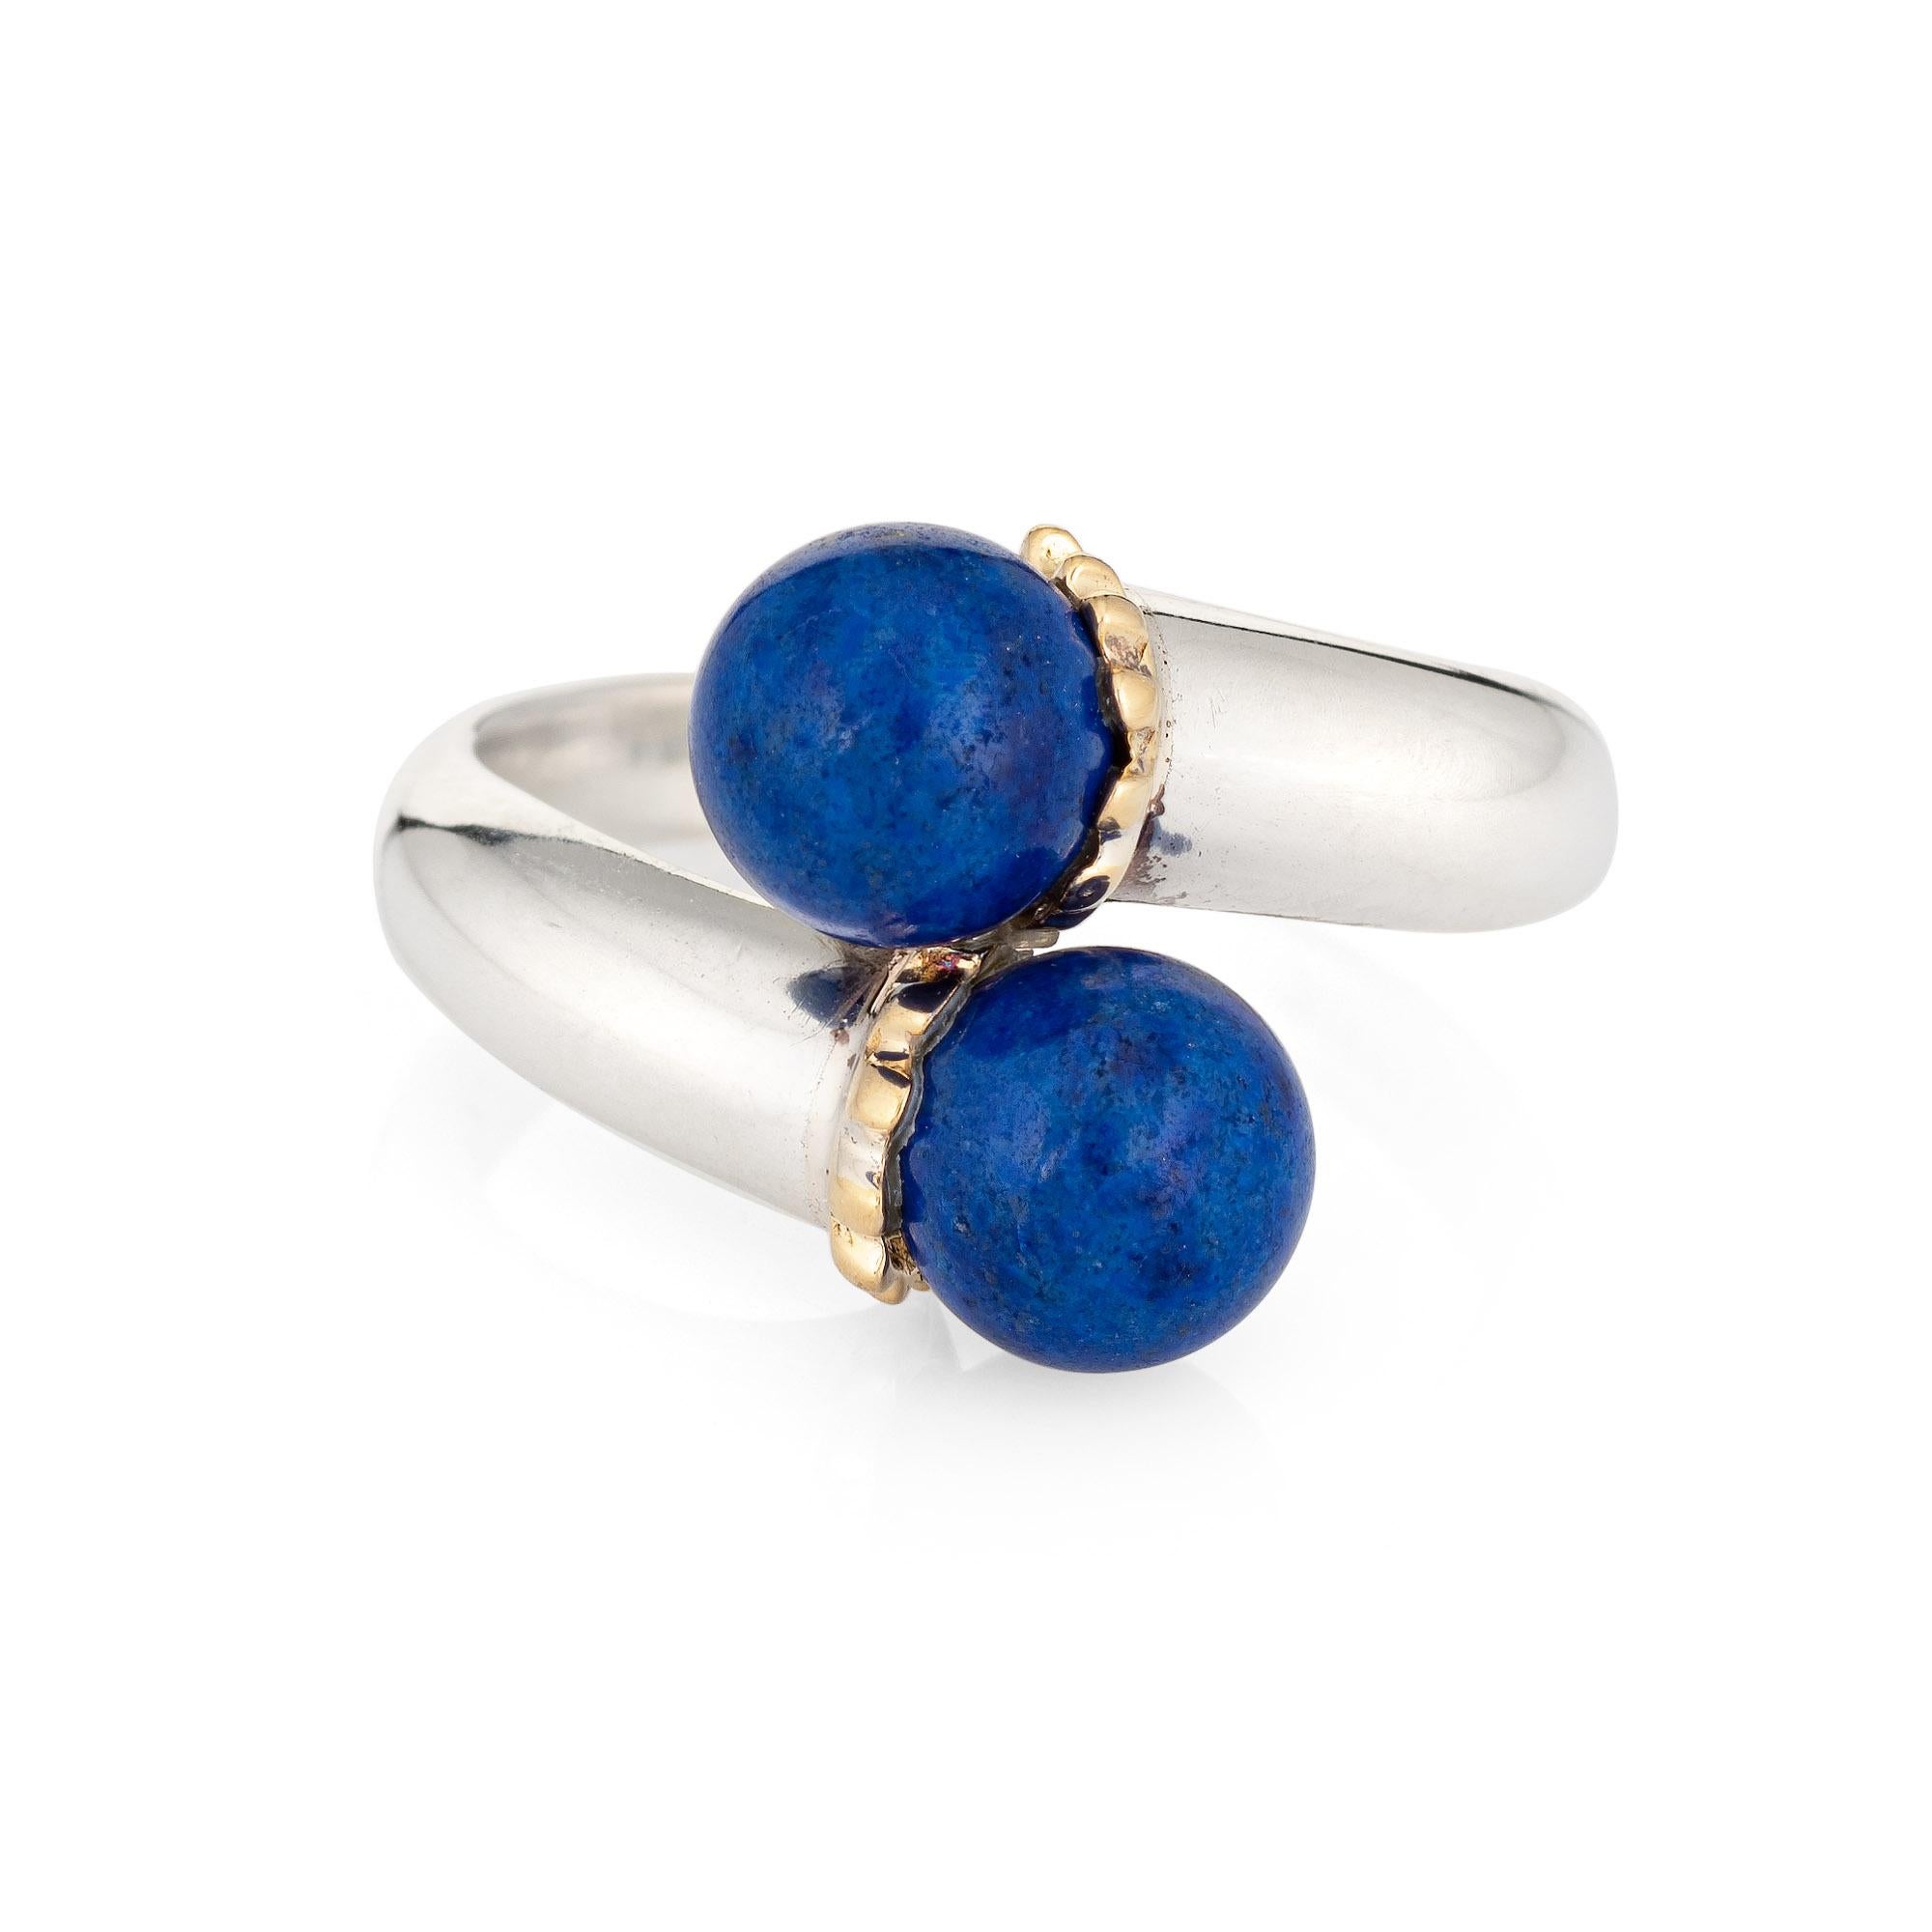 Finely detailed vintage Tiffany & Co lapis lazuli bypass ring (circa 1980s to 1990s) crafted in sterling silver & 18 karat yellow gold. 

Lapis lazuli beads each measure 7mm. The lapis is in very good condition and free of cracks or chips. 

The